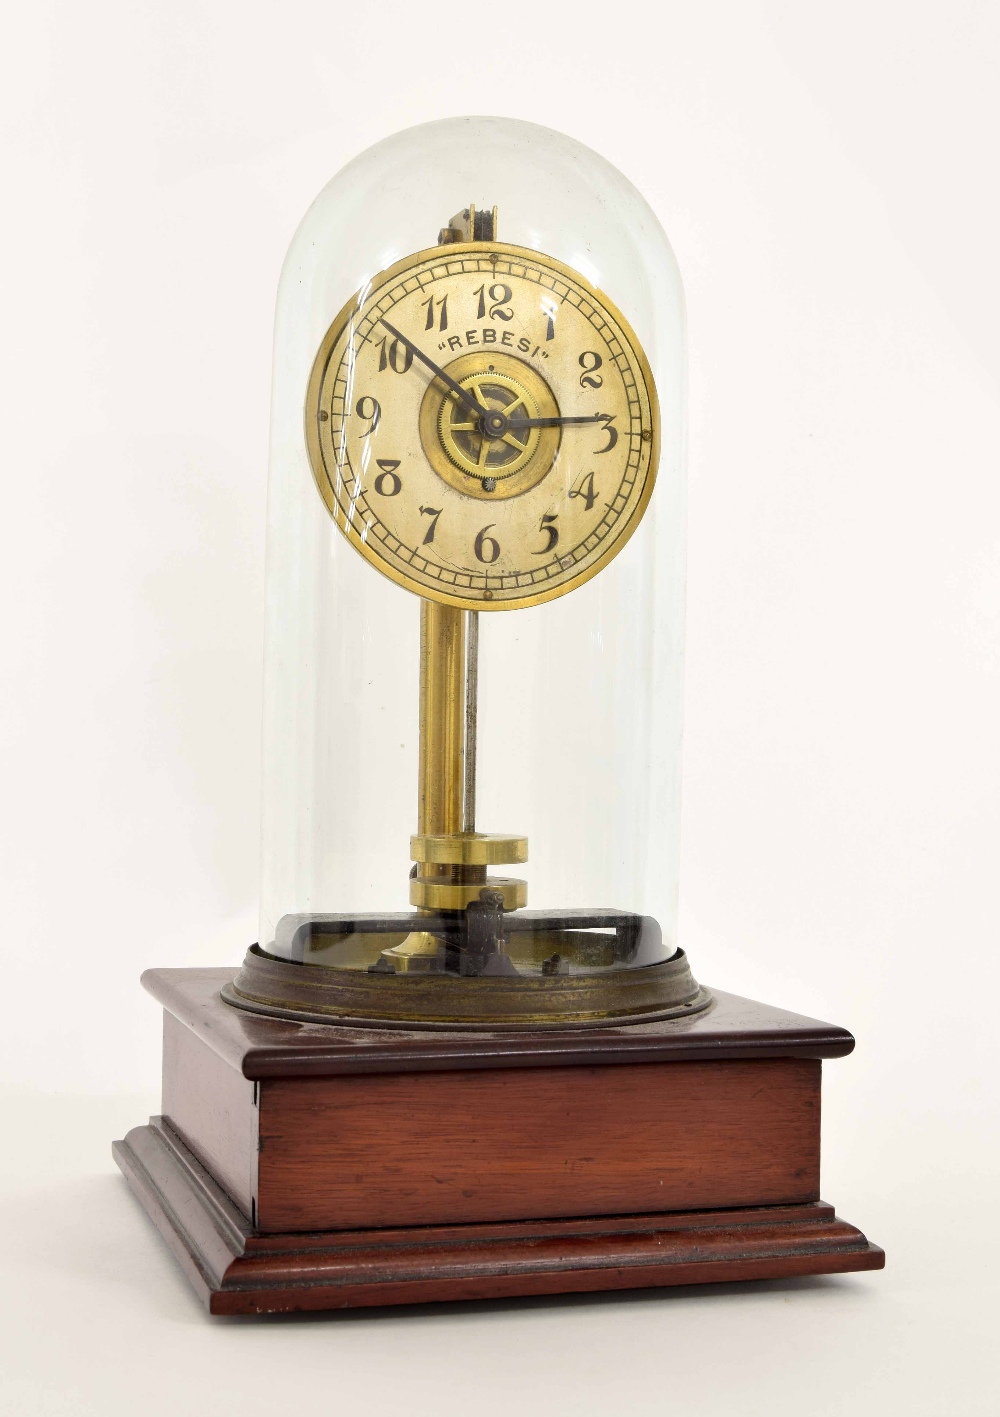 'Rebesi' electric mantel clock, the 3.5" silvered dial under a glass dome and upon a stepped